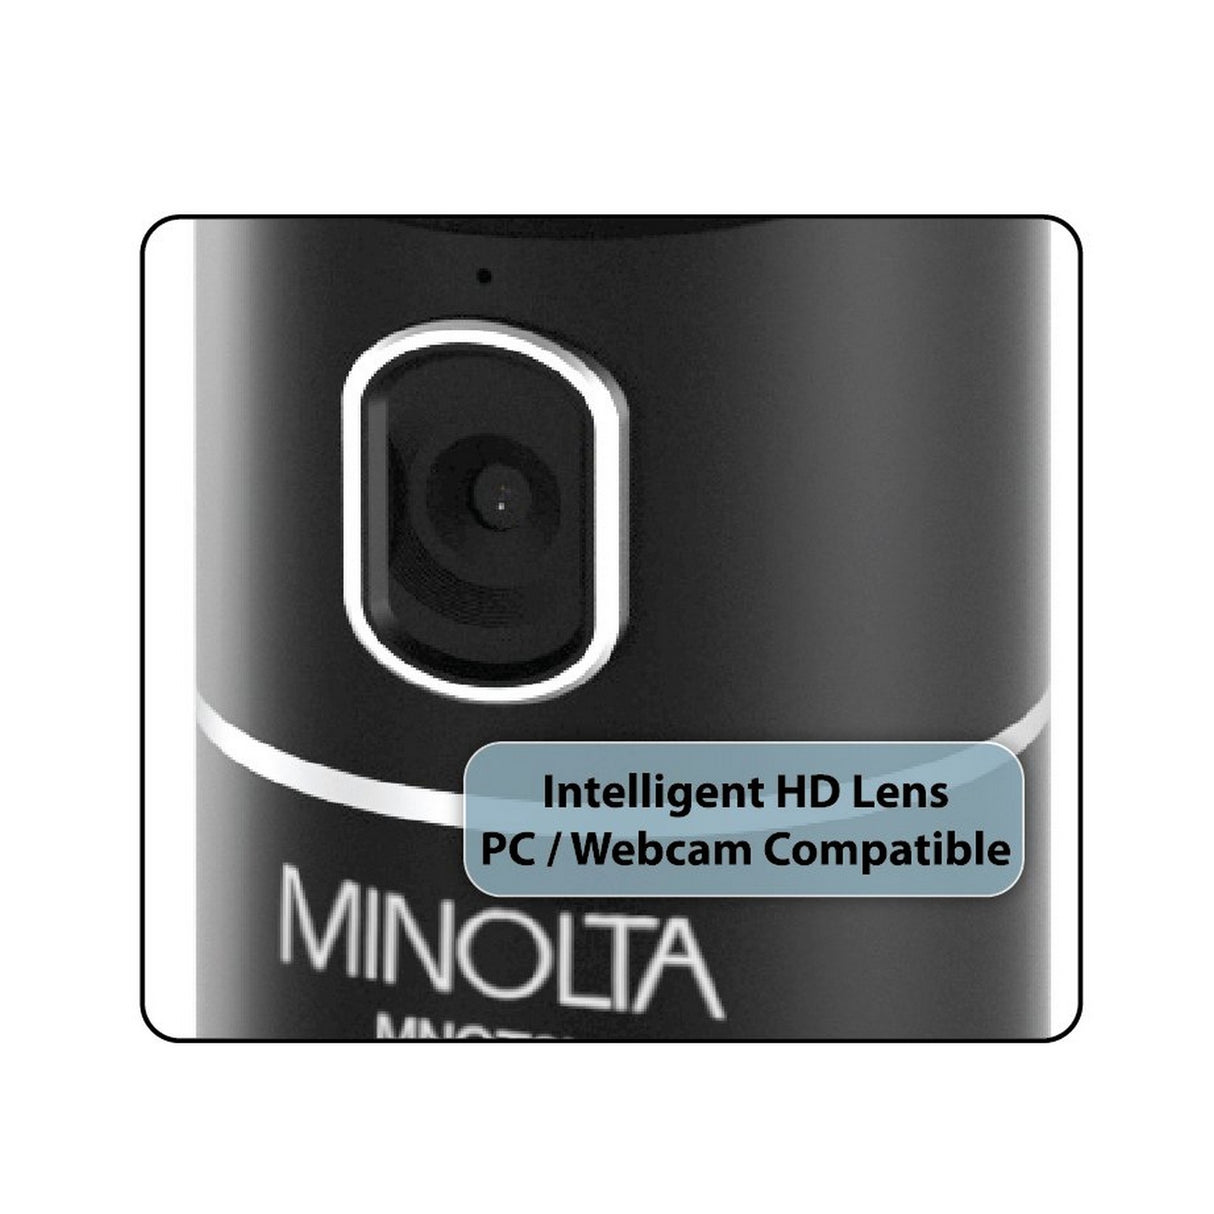 Minolta MNOT2L Smart Face-Tracking Mount System, Lithium-Ion Powered, Black